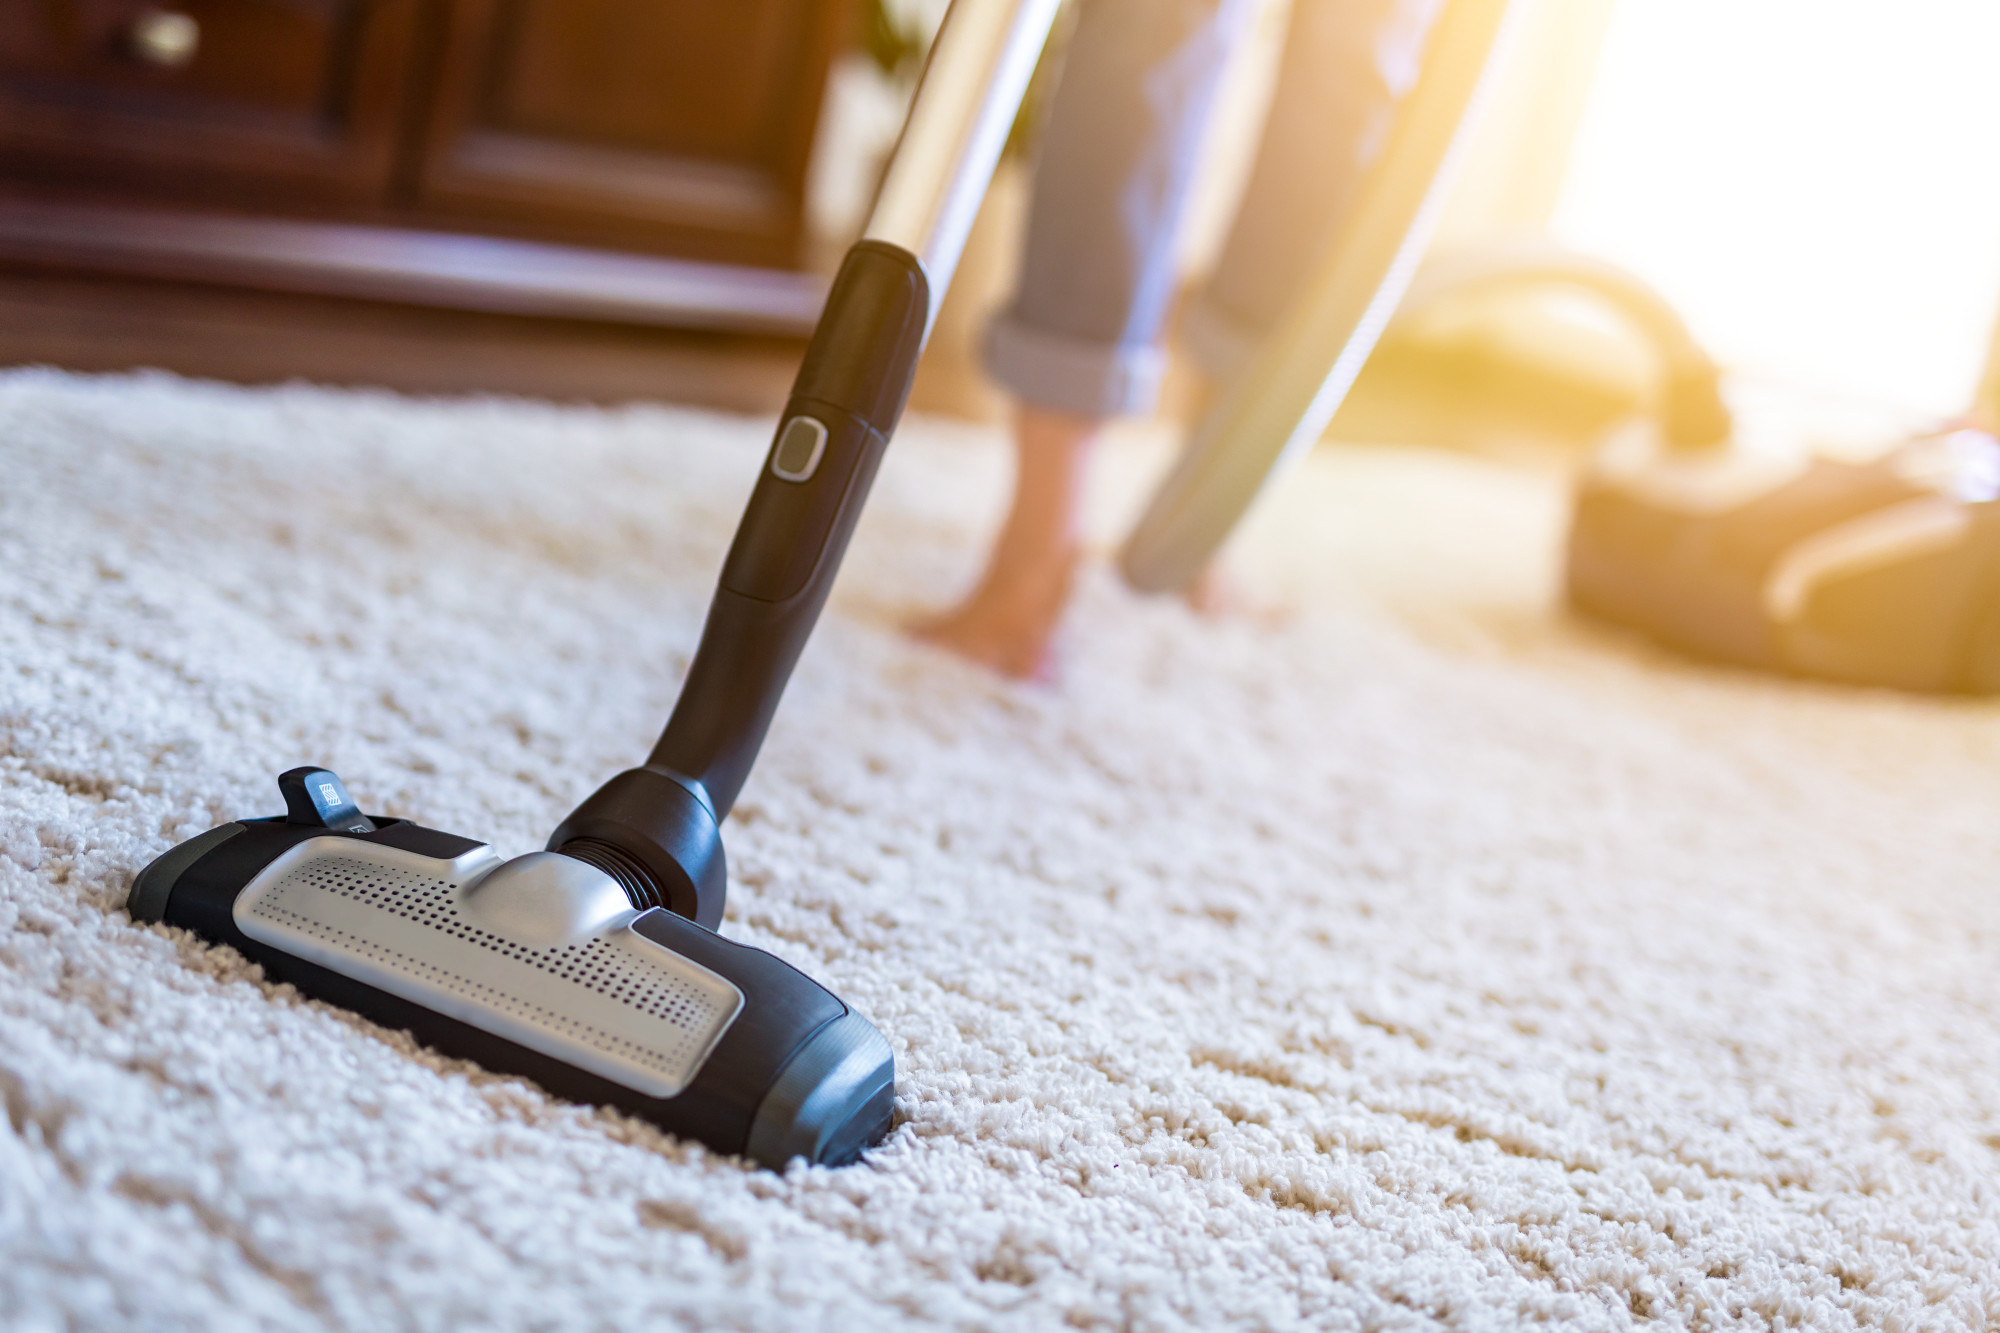 Carpet and rugs in high traffic areas can wear fast if not properly cared for. Check out our tips about rug cleaning and how to care for rugs and carpet today.